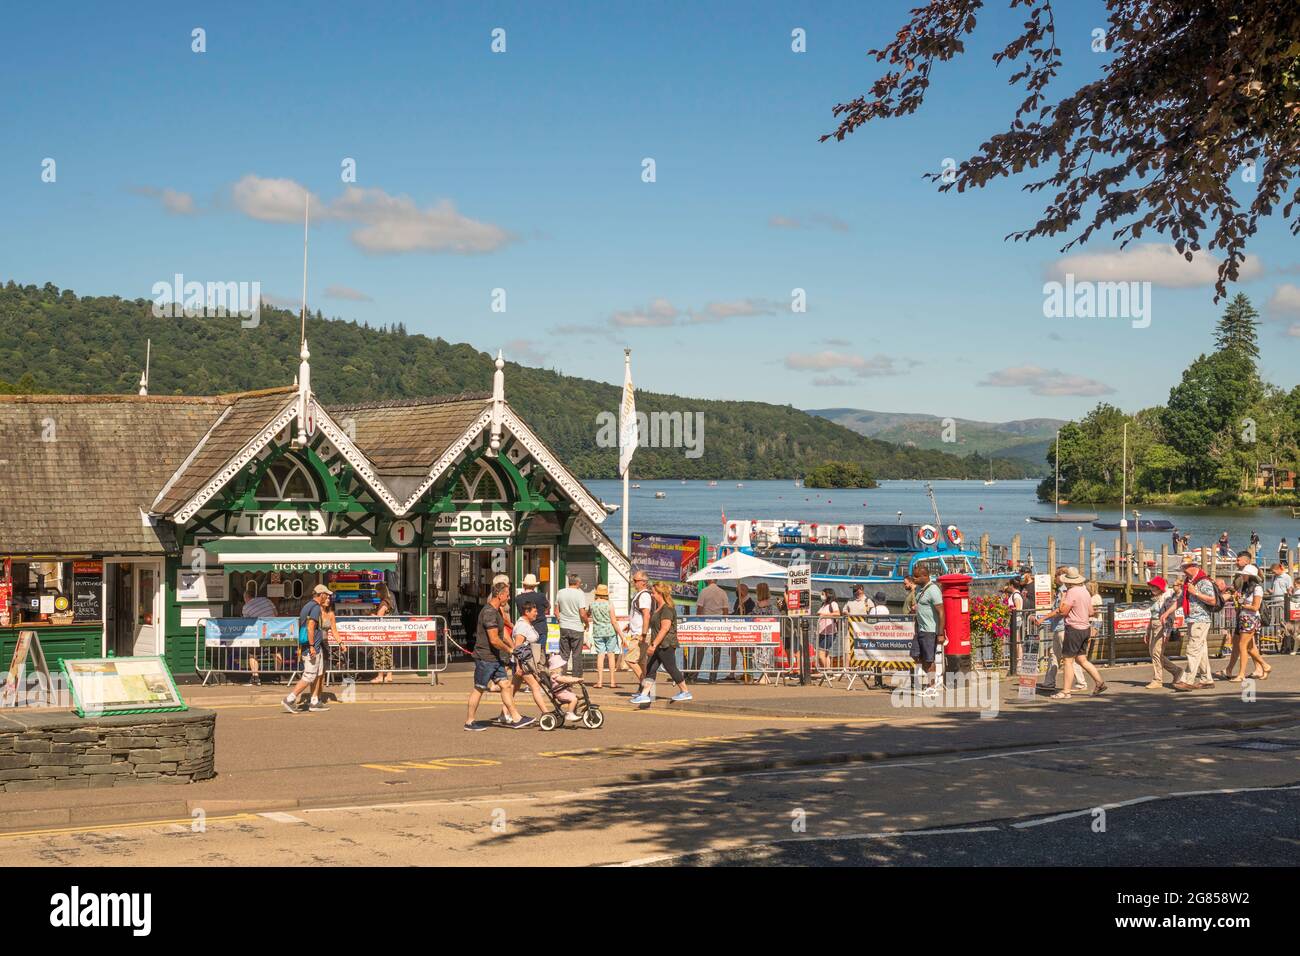 Visitors at the ticket office for boat trips at Bowness on Windermere, Cumbria, England, UK Stock Photo